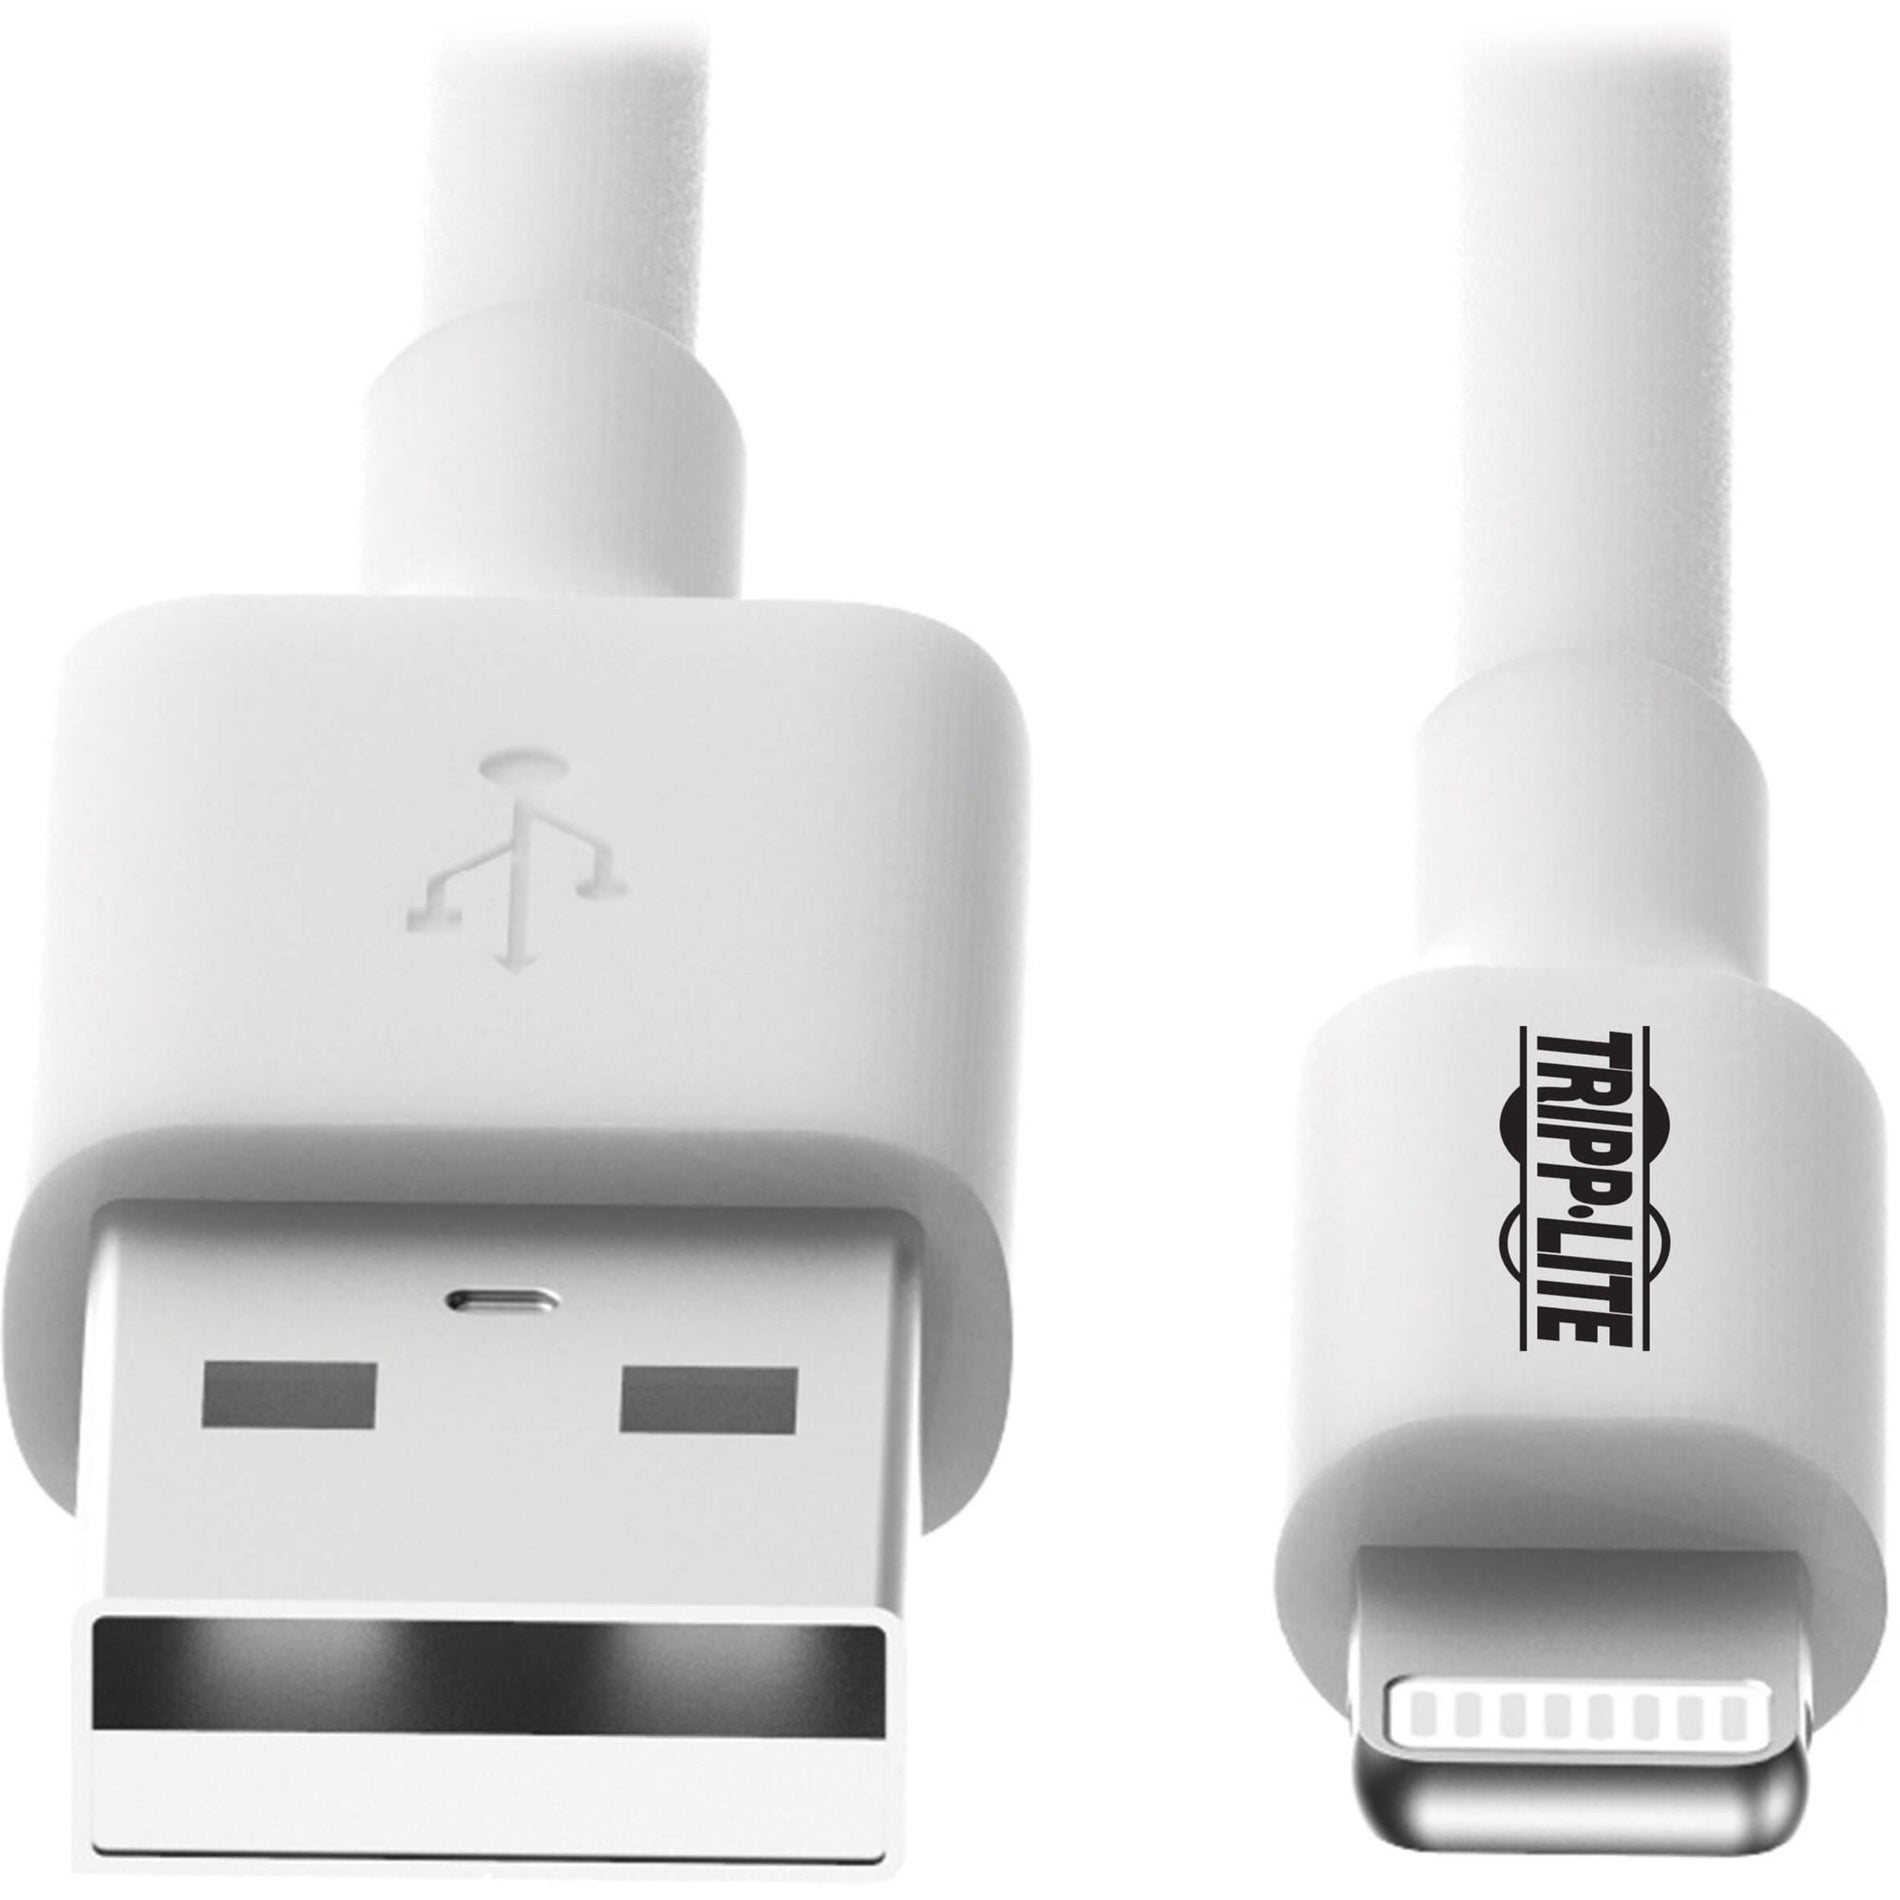 Tripp Lite M100-006-WH 6ft (1.8M) White USB Sync / Charge Cable with Lightning Connector, Compatible with iPhone, iPad, iPod